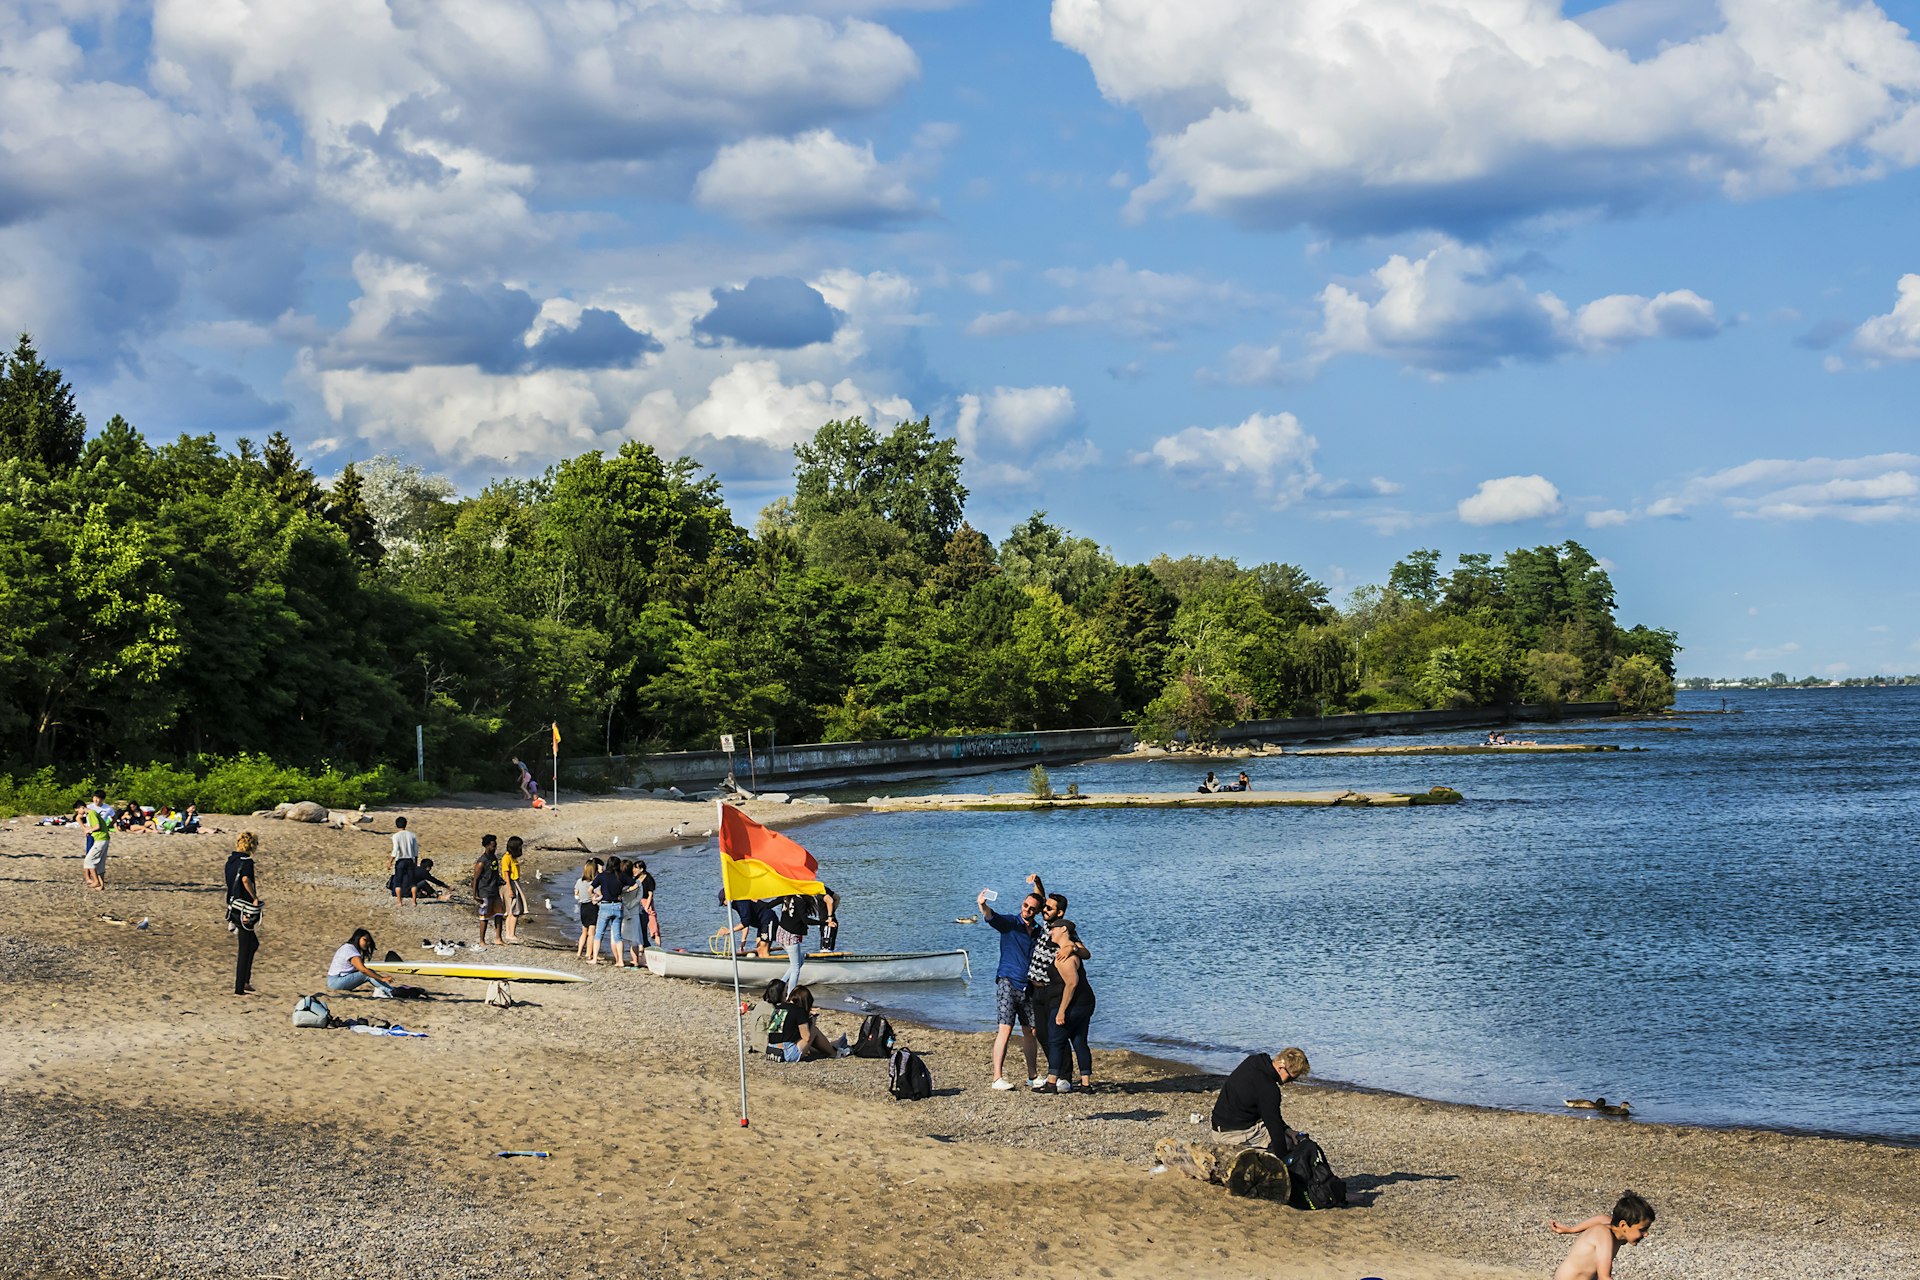 Beachgoers on a crescent-shaped beach with trees in theb ackground